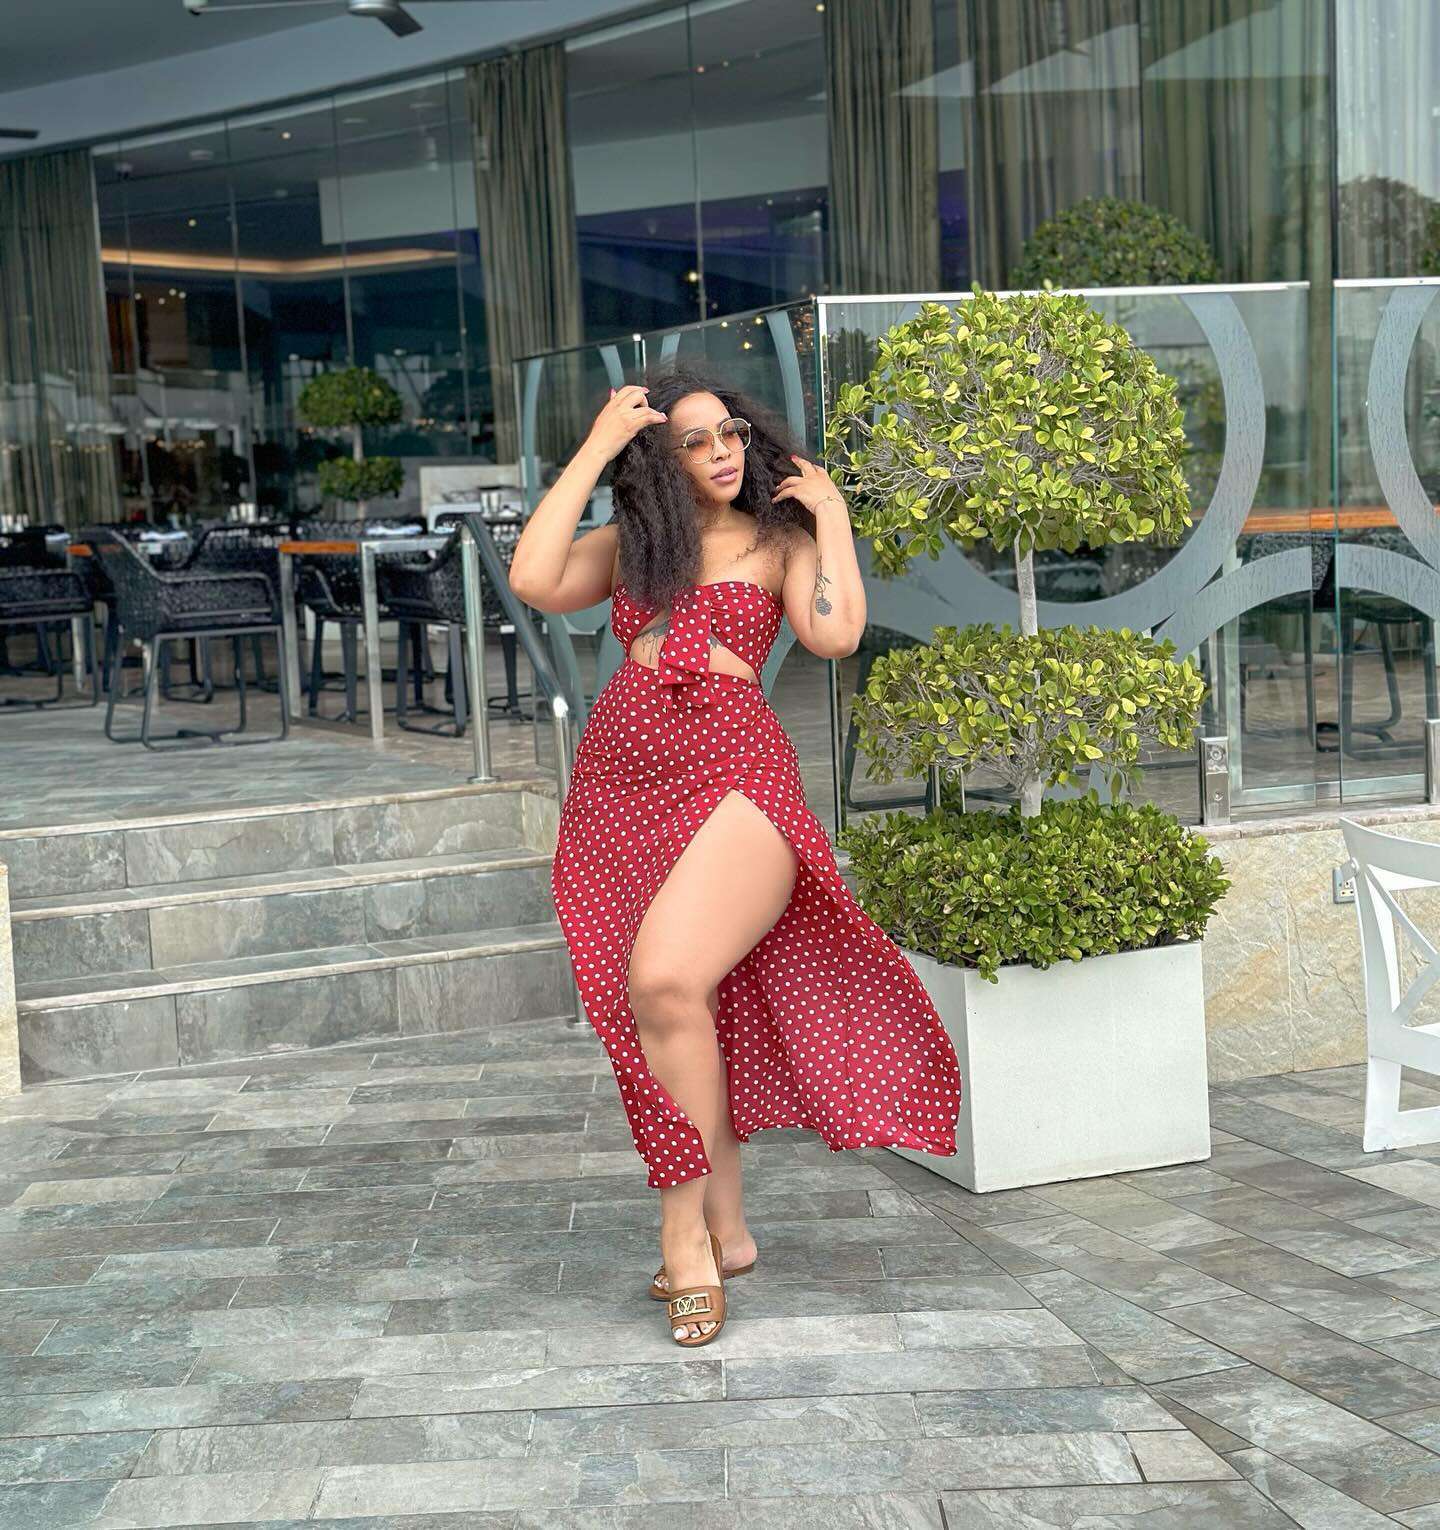 Brown Mbombo Biography: Real Name, Age, Twins, Boyfriend, Net Worth, Instagram, Son, Parents